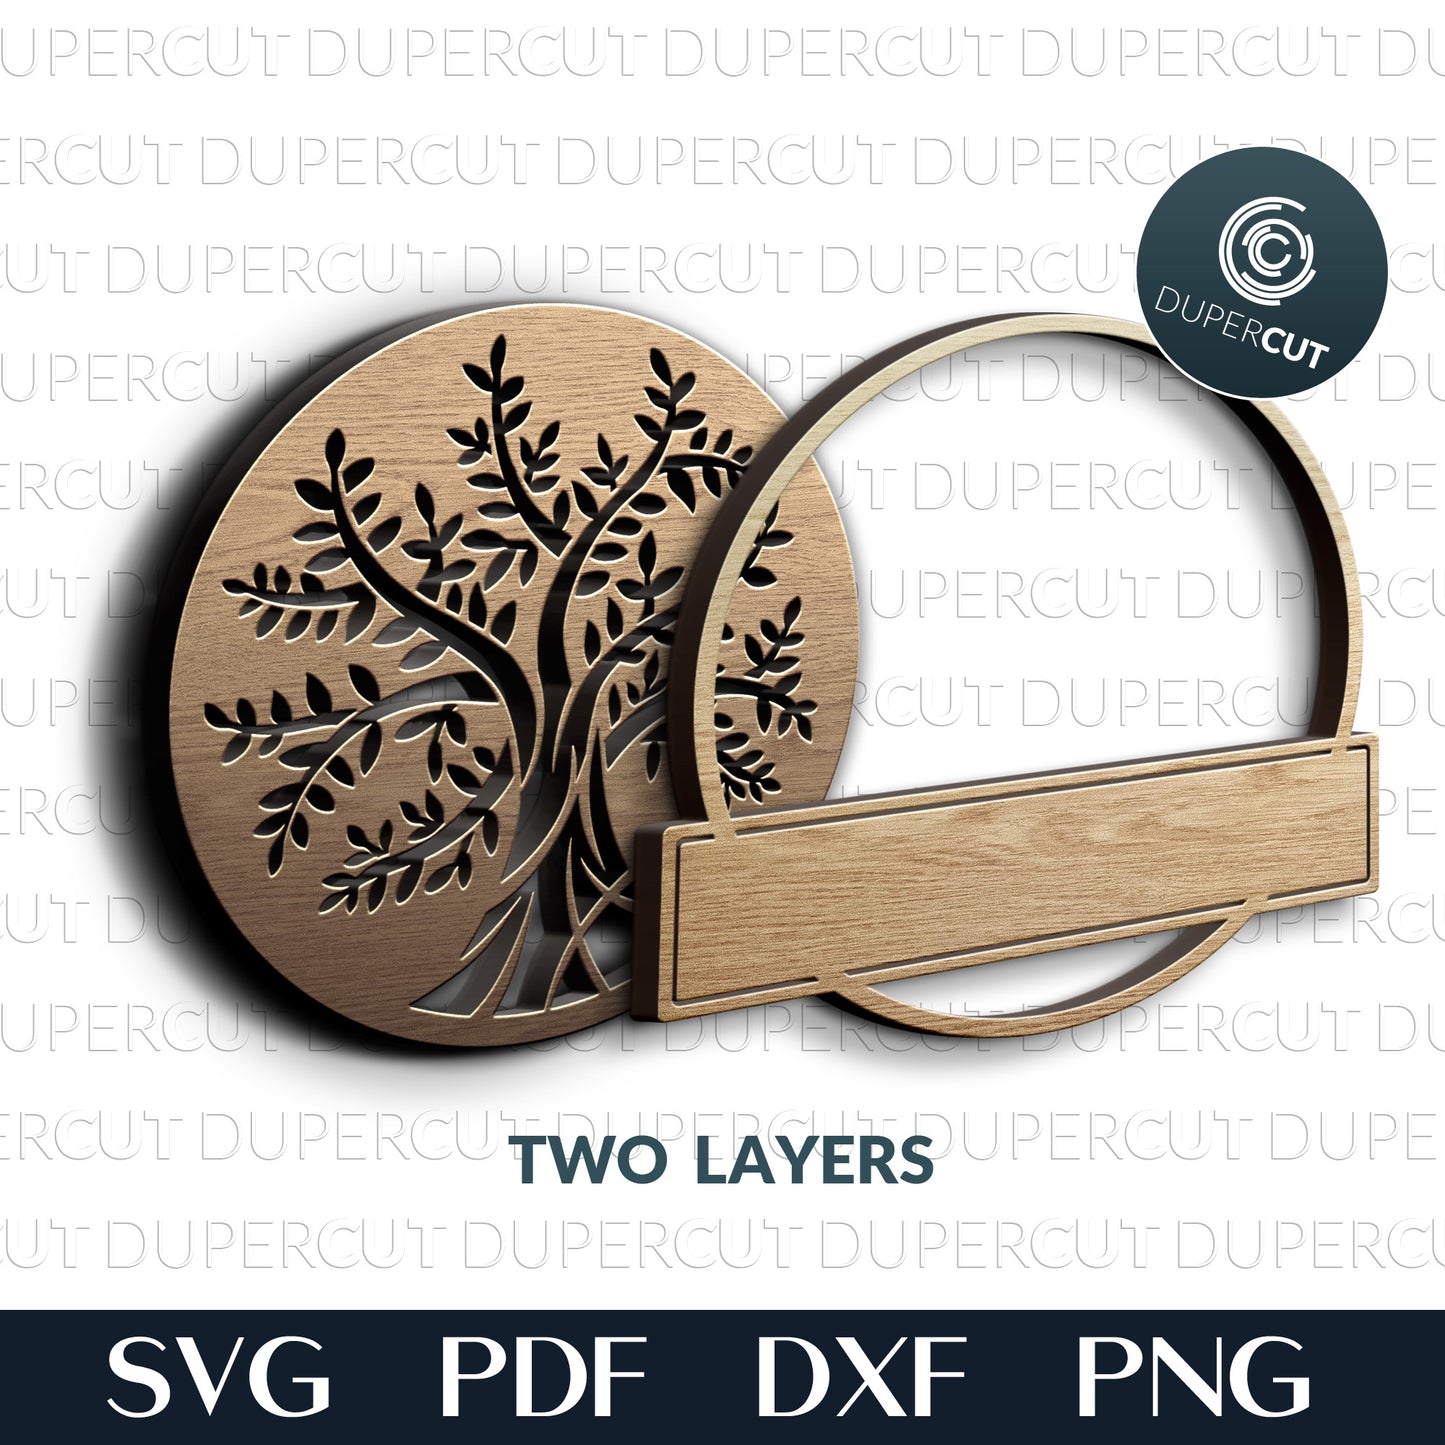 Tree of life sign add custom text - SVG PDF DXF layered files for laser cutting machines - Glowforge, CNC plasma, Cricut, Silhouette cameo